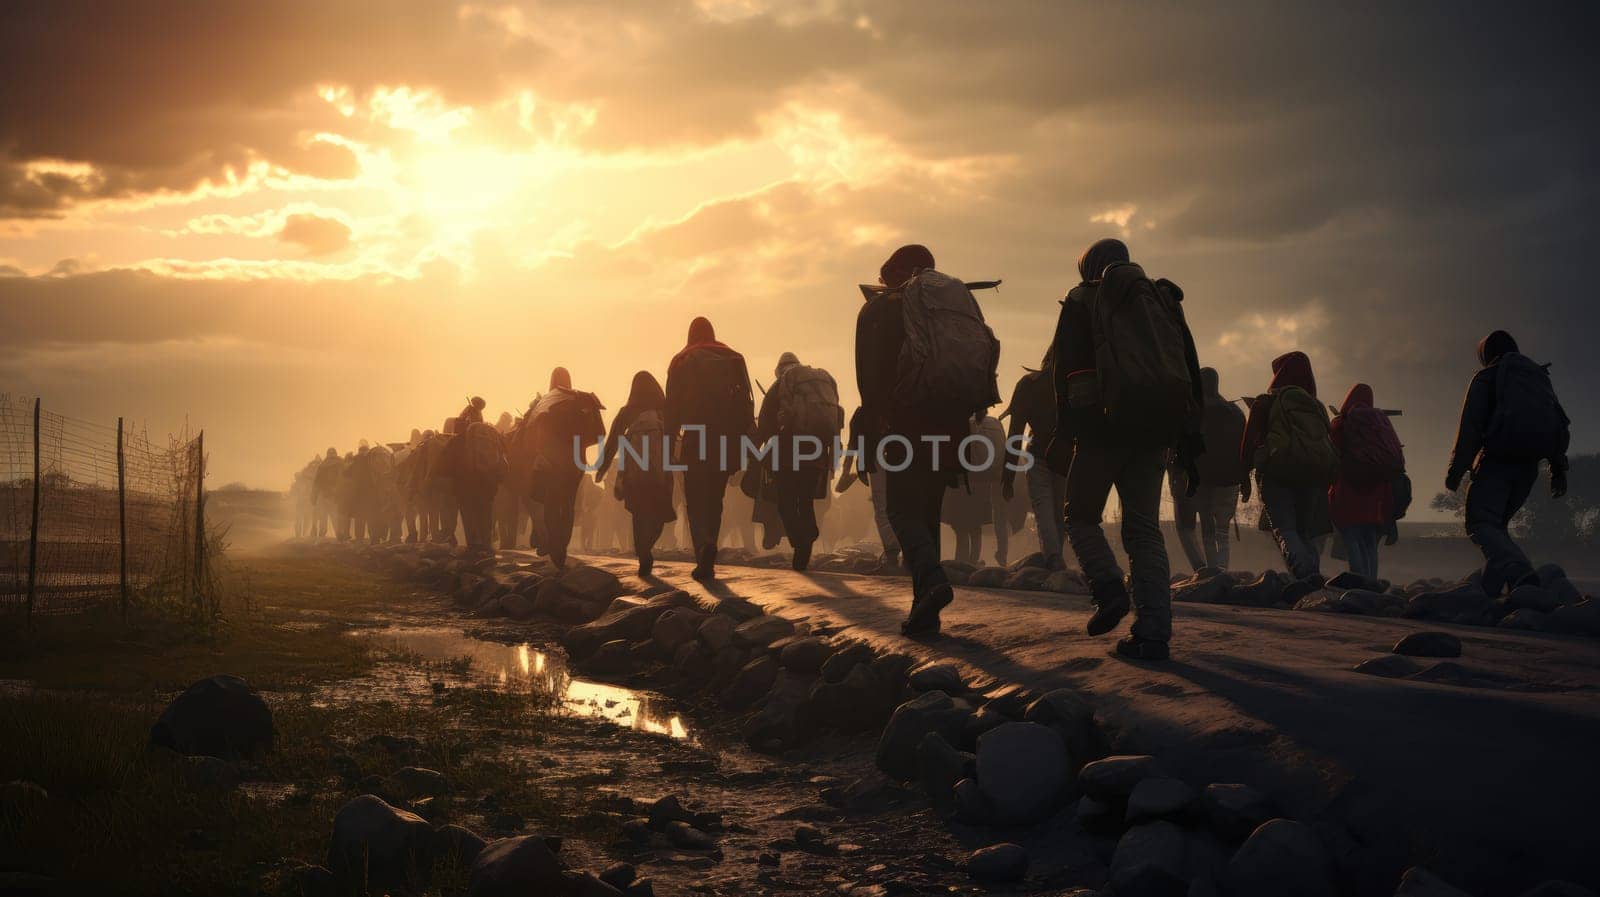 Migrants crossing the border on foot by natali_brill